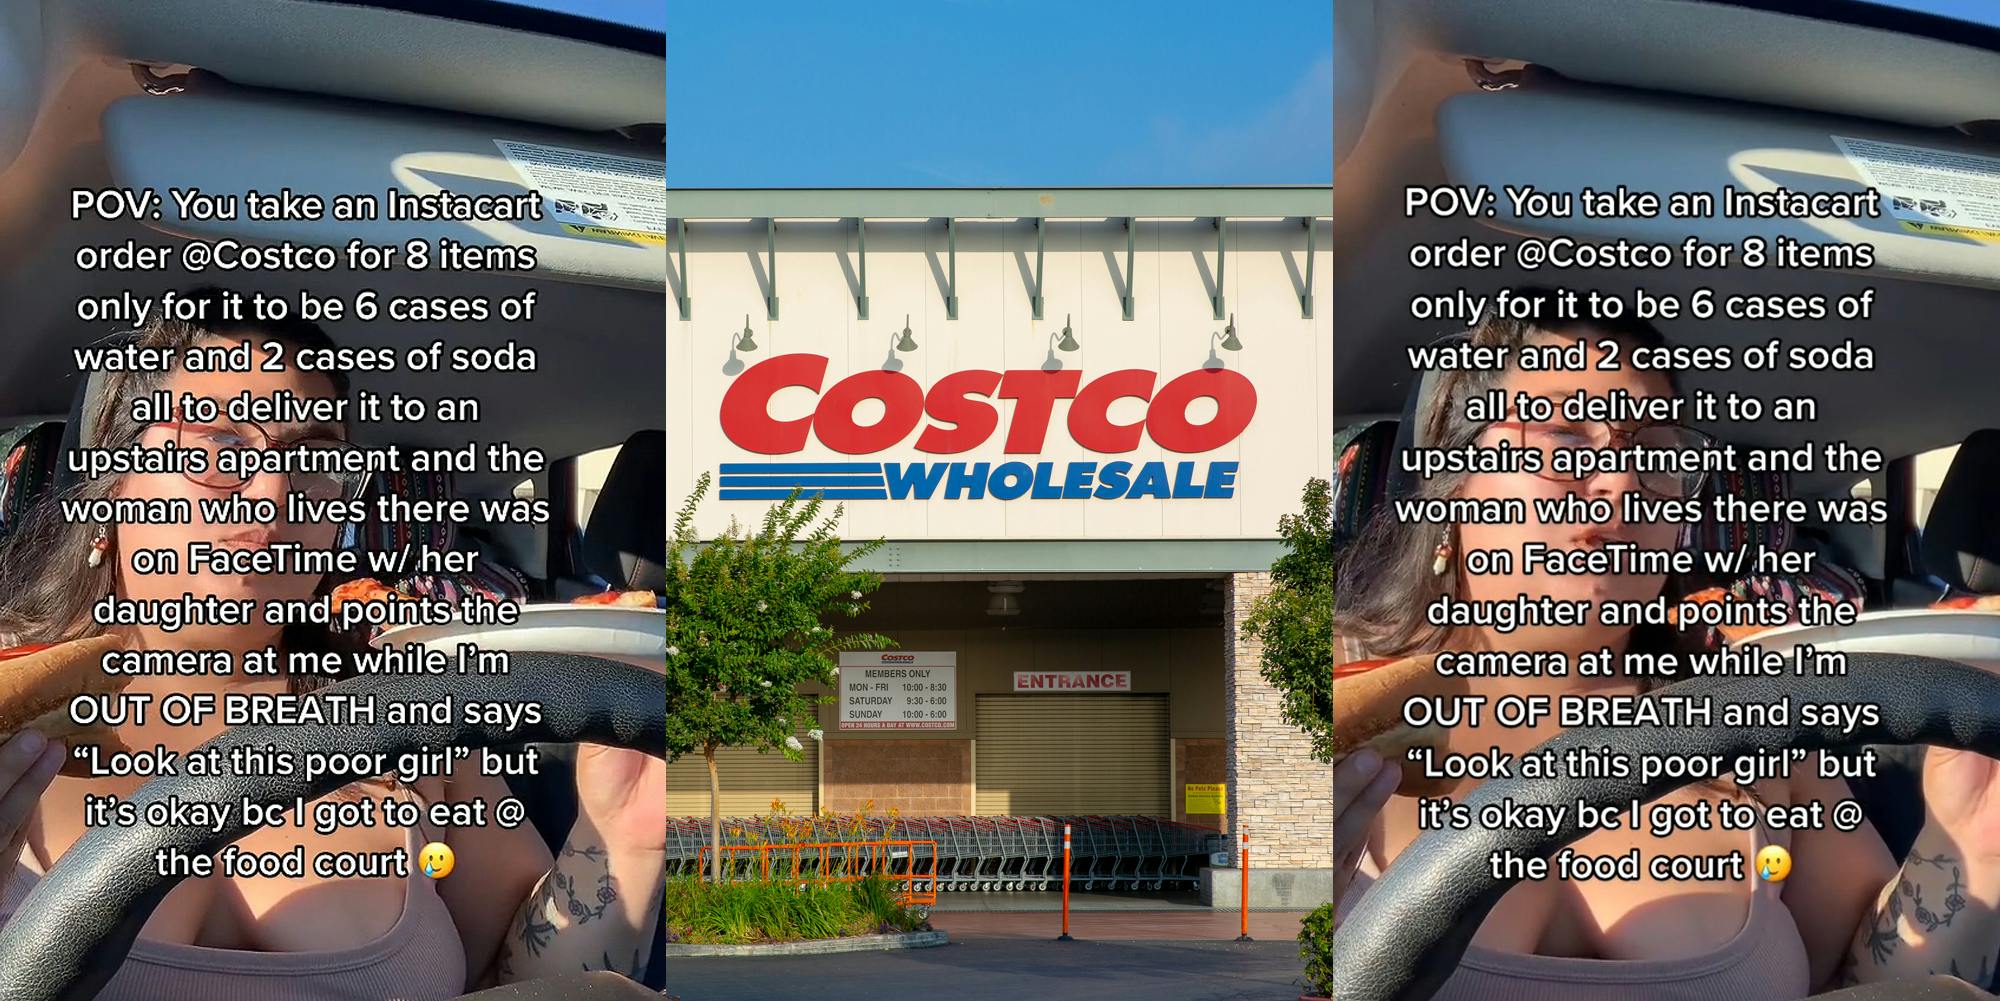 woman eating pizza in car caption "POV: You take an Instacart order @Costco for 8 items only for it to be 6 cases of water and 2 cases of soda all to deliver it to an upstairs apartment and the woman who lives there was on Facetime w/ her daughter and points the camera at me while I'm OUT OF BREATH and says "Look at this poor girl" but it's okay bc I got to eat @ the food court" (l) Costco building with sign (c) woman eating pizza in car caption "POV: You take an Instacart order @Costco for 8 items only for it to be 6 cases of water and 2 cases of soda all to deliver it to an upstairs apartment and the woman who lives there was on Facetime w/ her daughter and points the camera at me while I'm OUT OF BREATH and says "Look at this poor girl" but it's okay bc I got to eat @ the food court" (r)